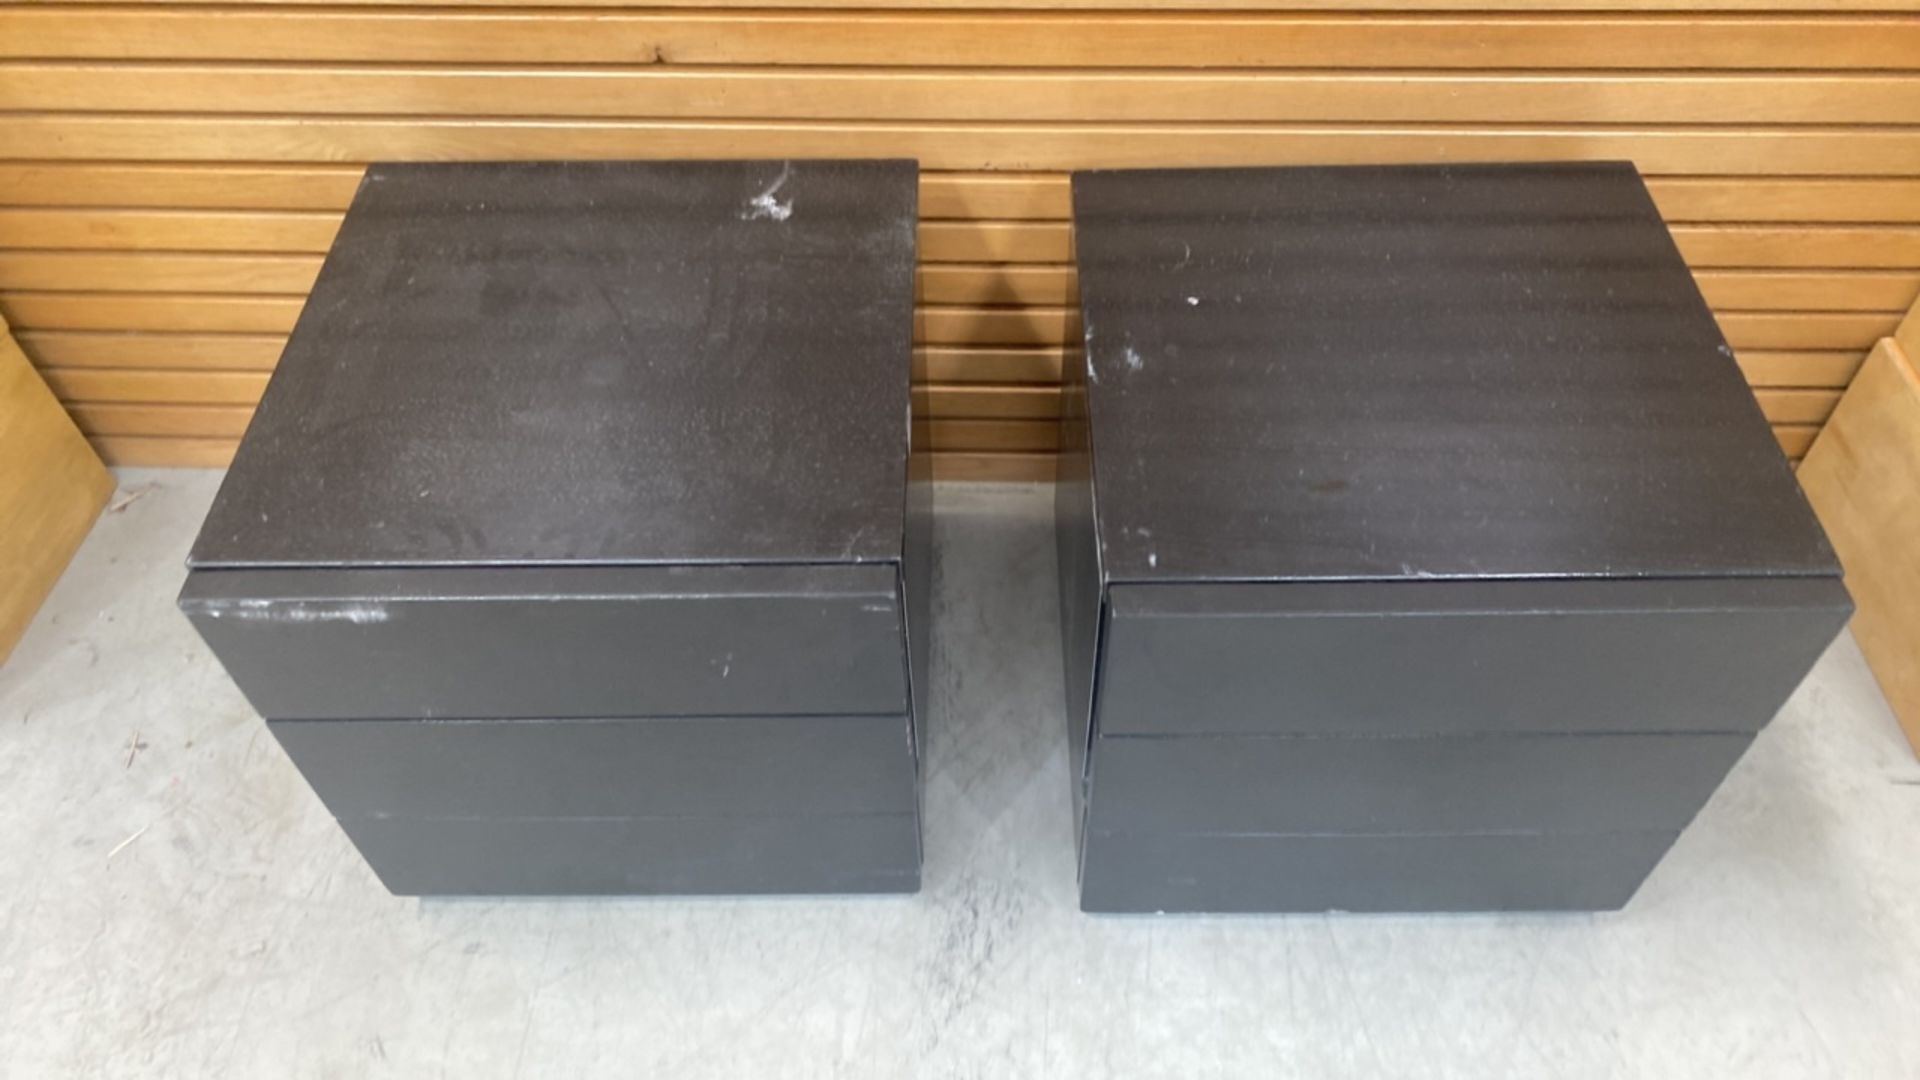 Black Wooden Side Table With 2 Draws X2 - Image 2 of 3